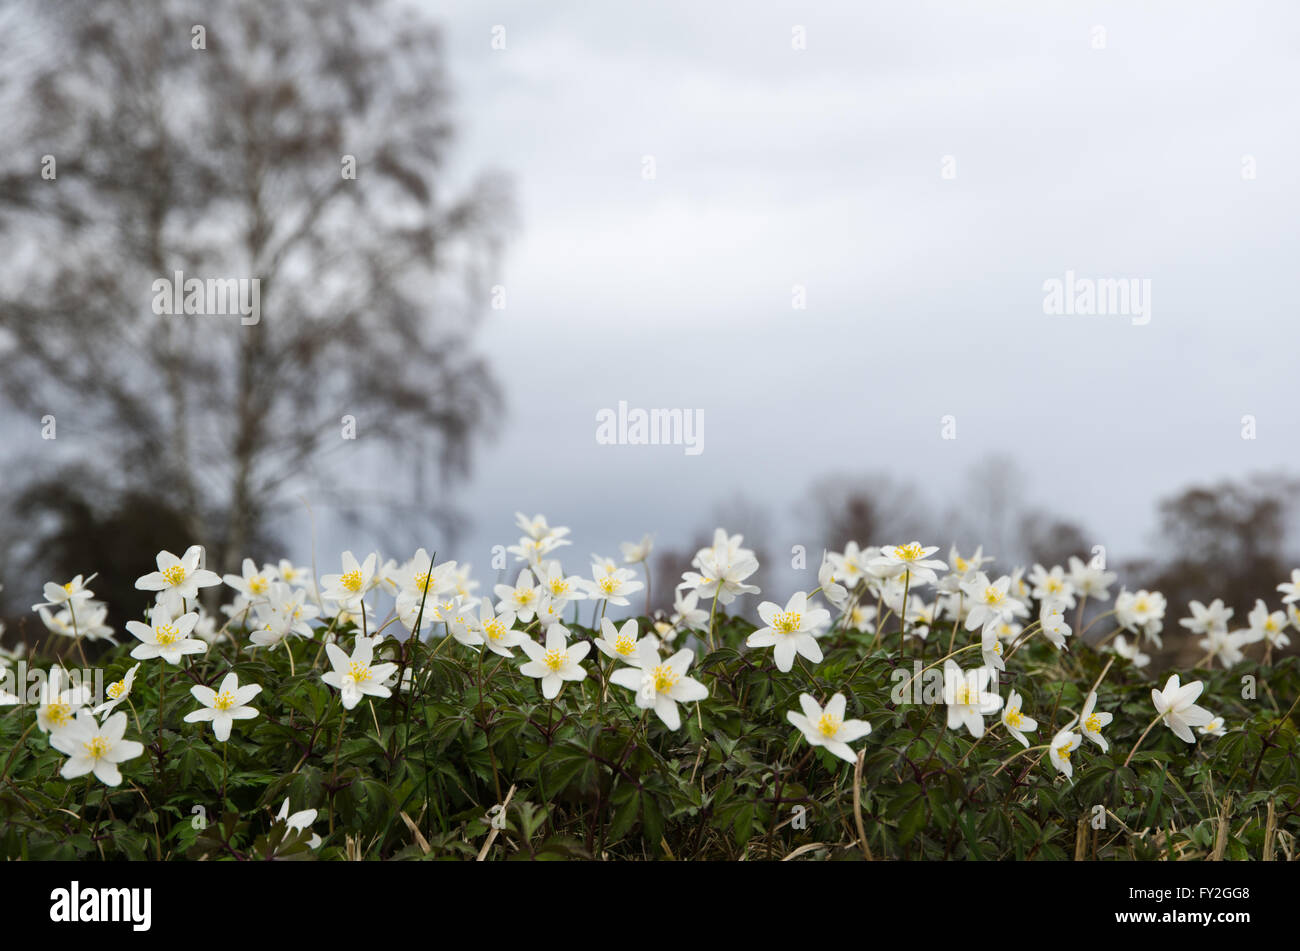 Springtime view at a group of blossom windflowers with a blurred background Stock Photo